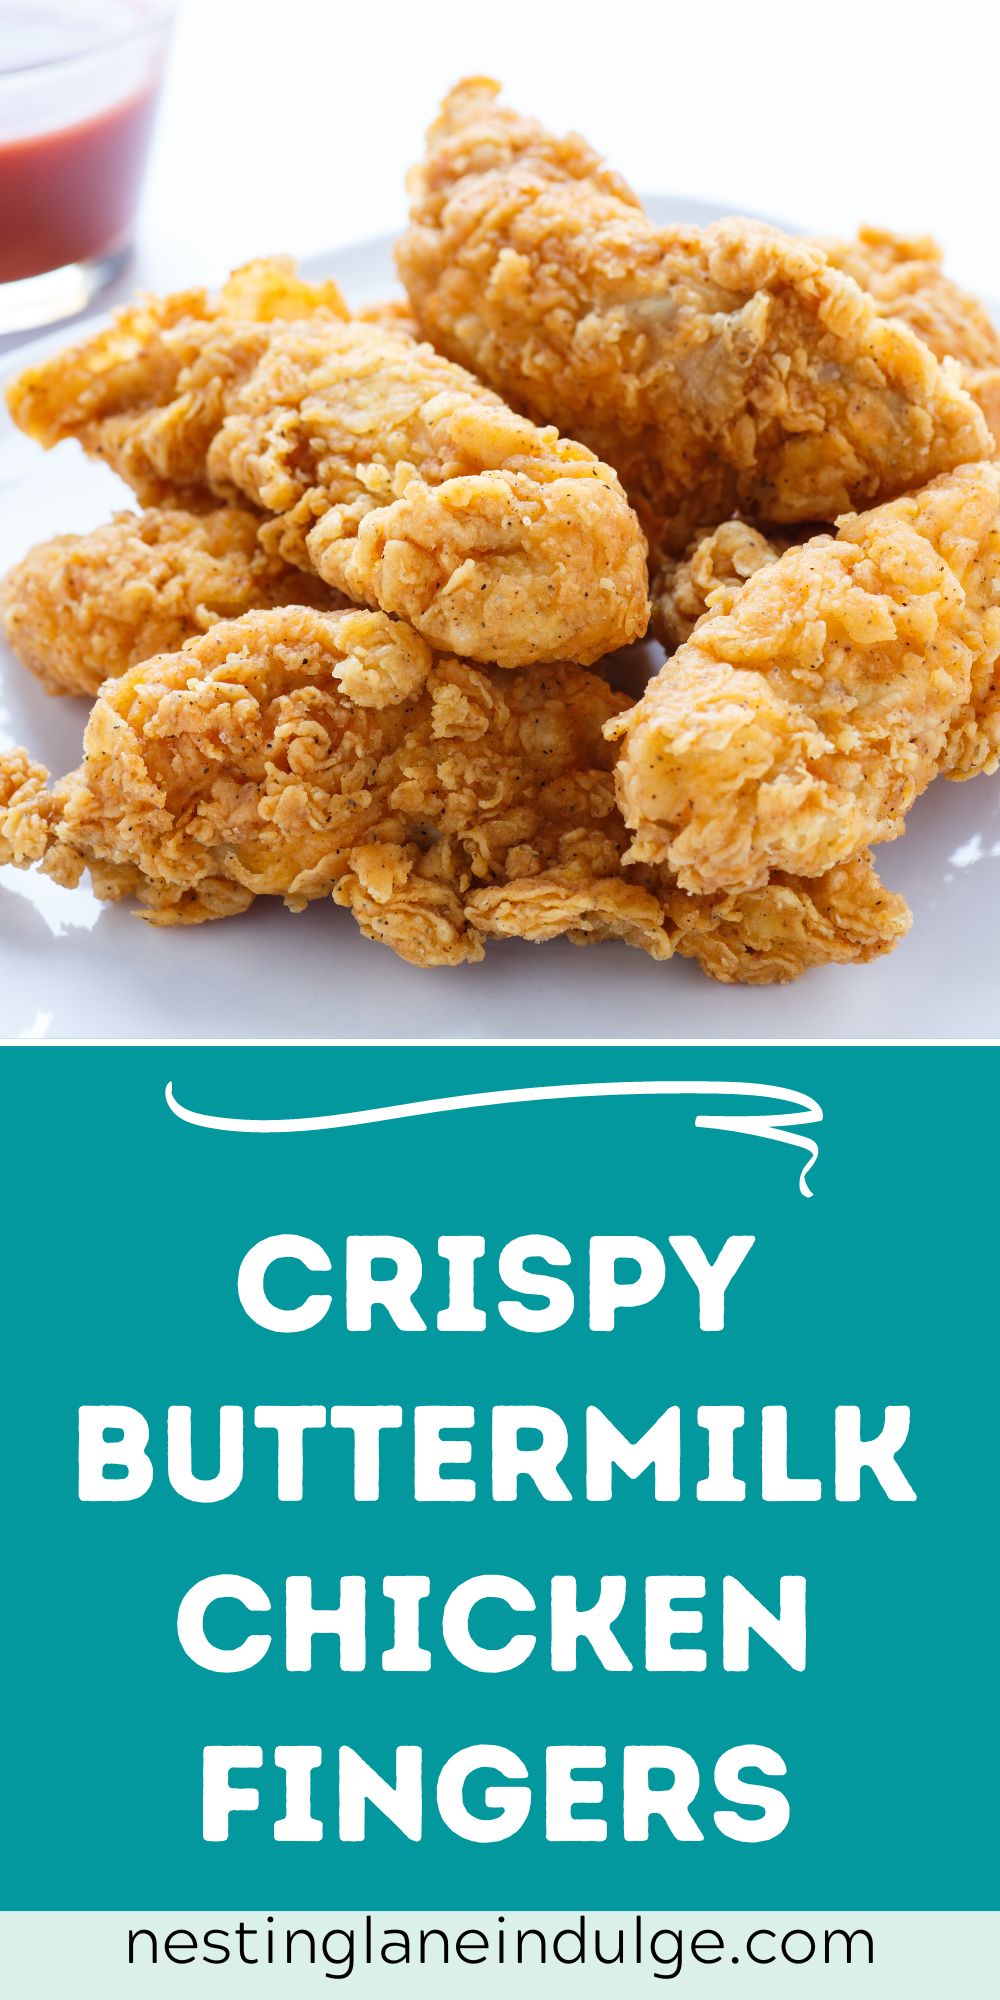 Graphic for Pinterest of Crispy and Delicious Buttermilk Chicken Fingers Recipe.